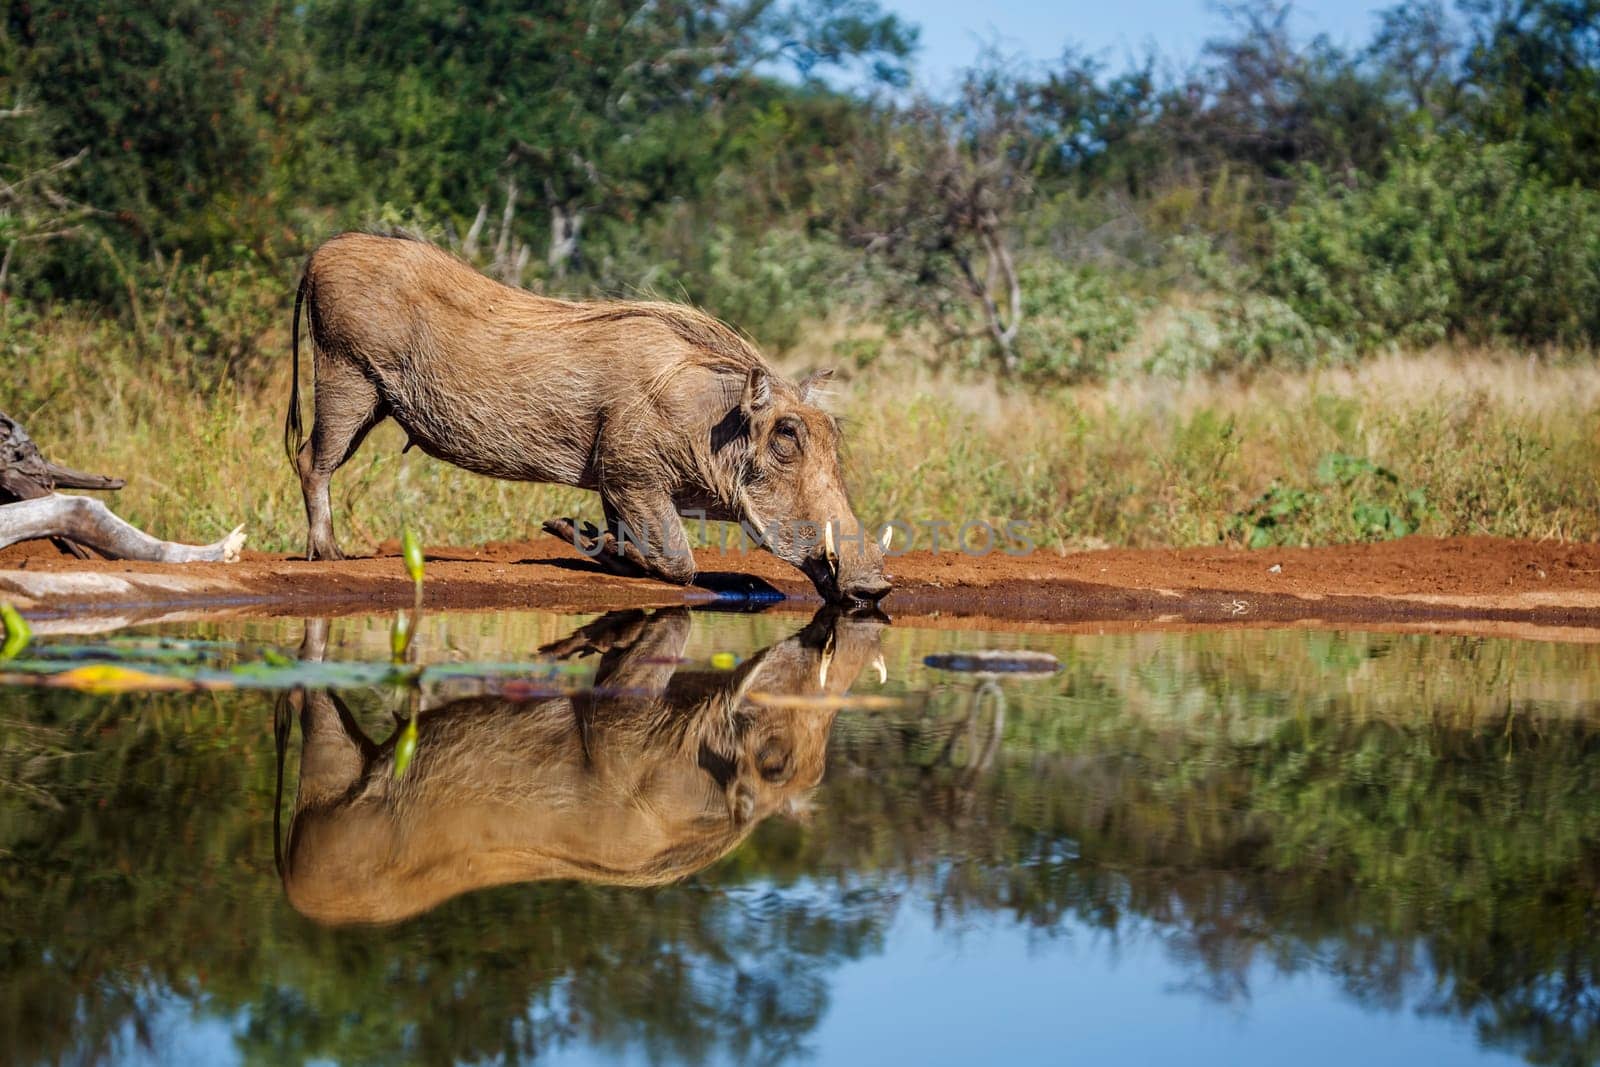 Common warthog in Kruger national park, South Africa by PACOCOMO